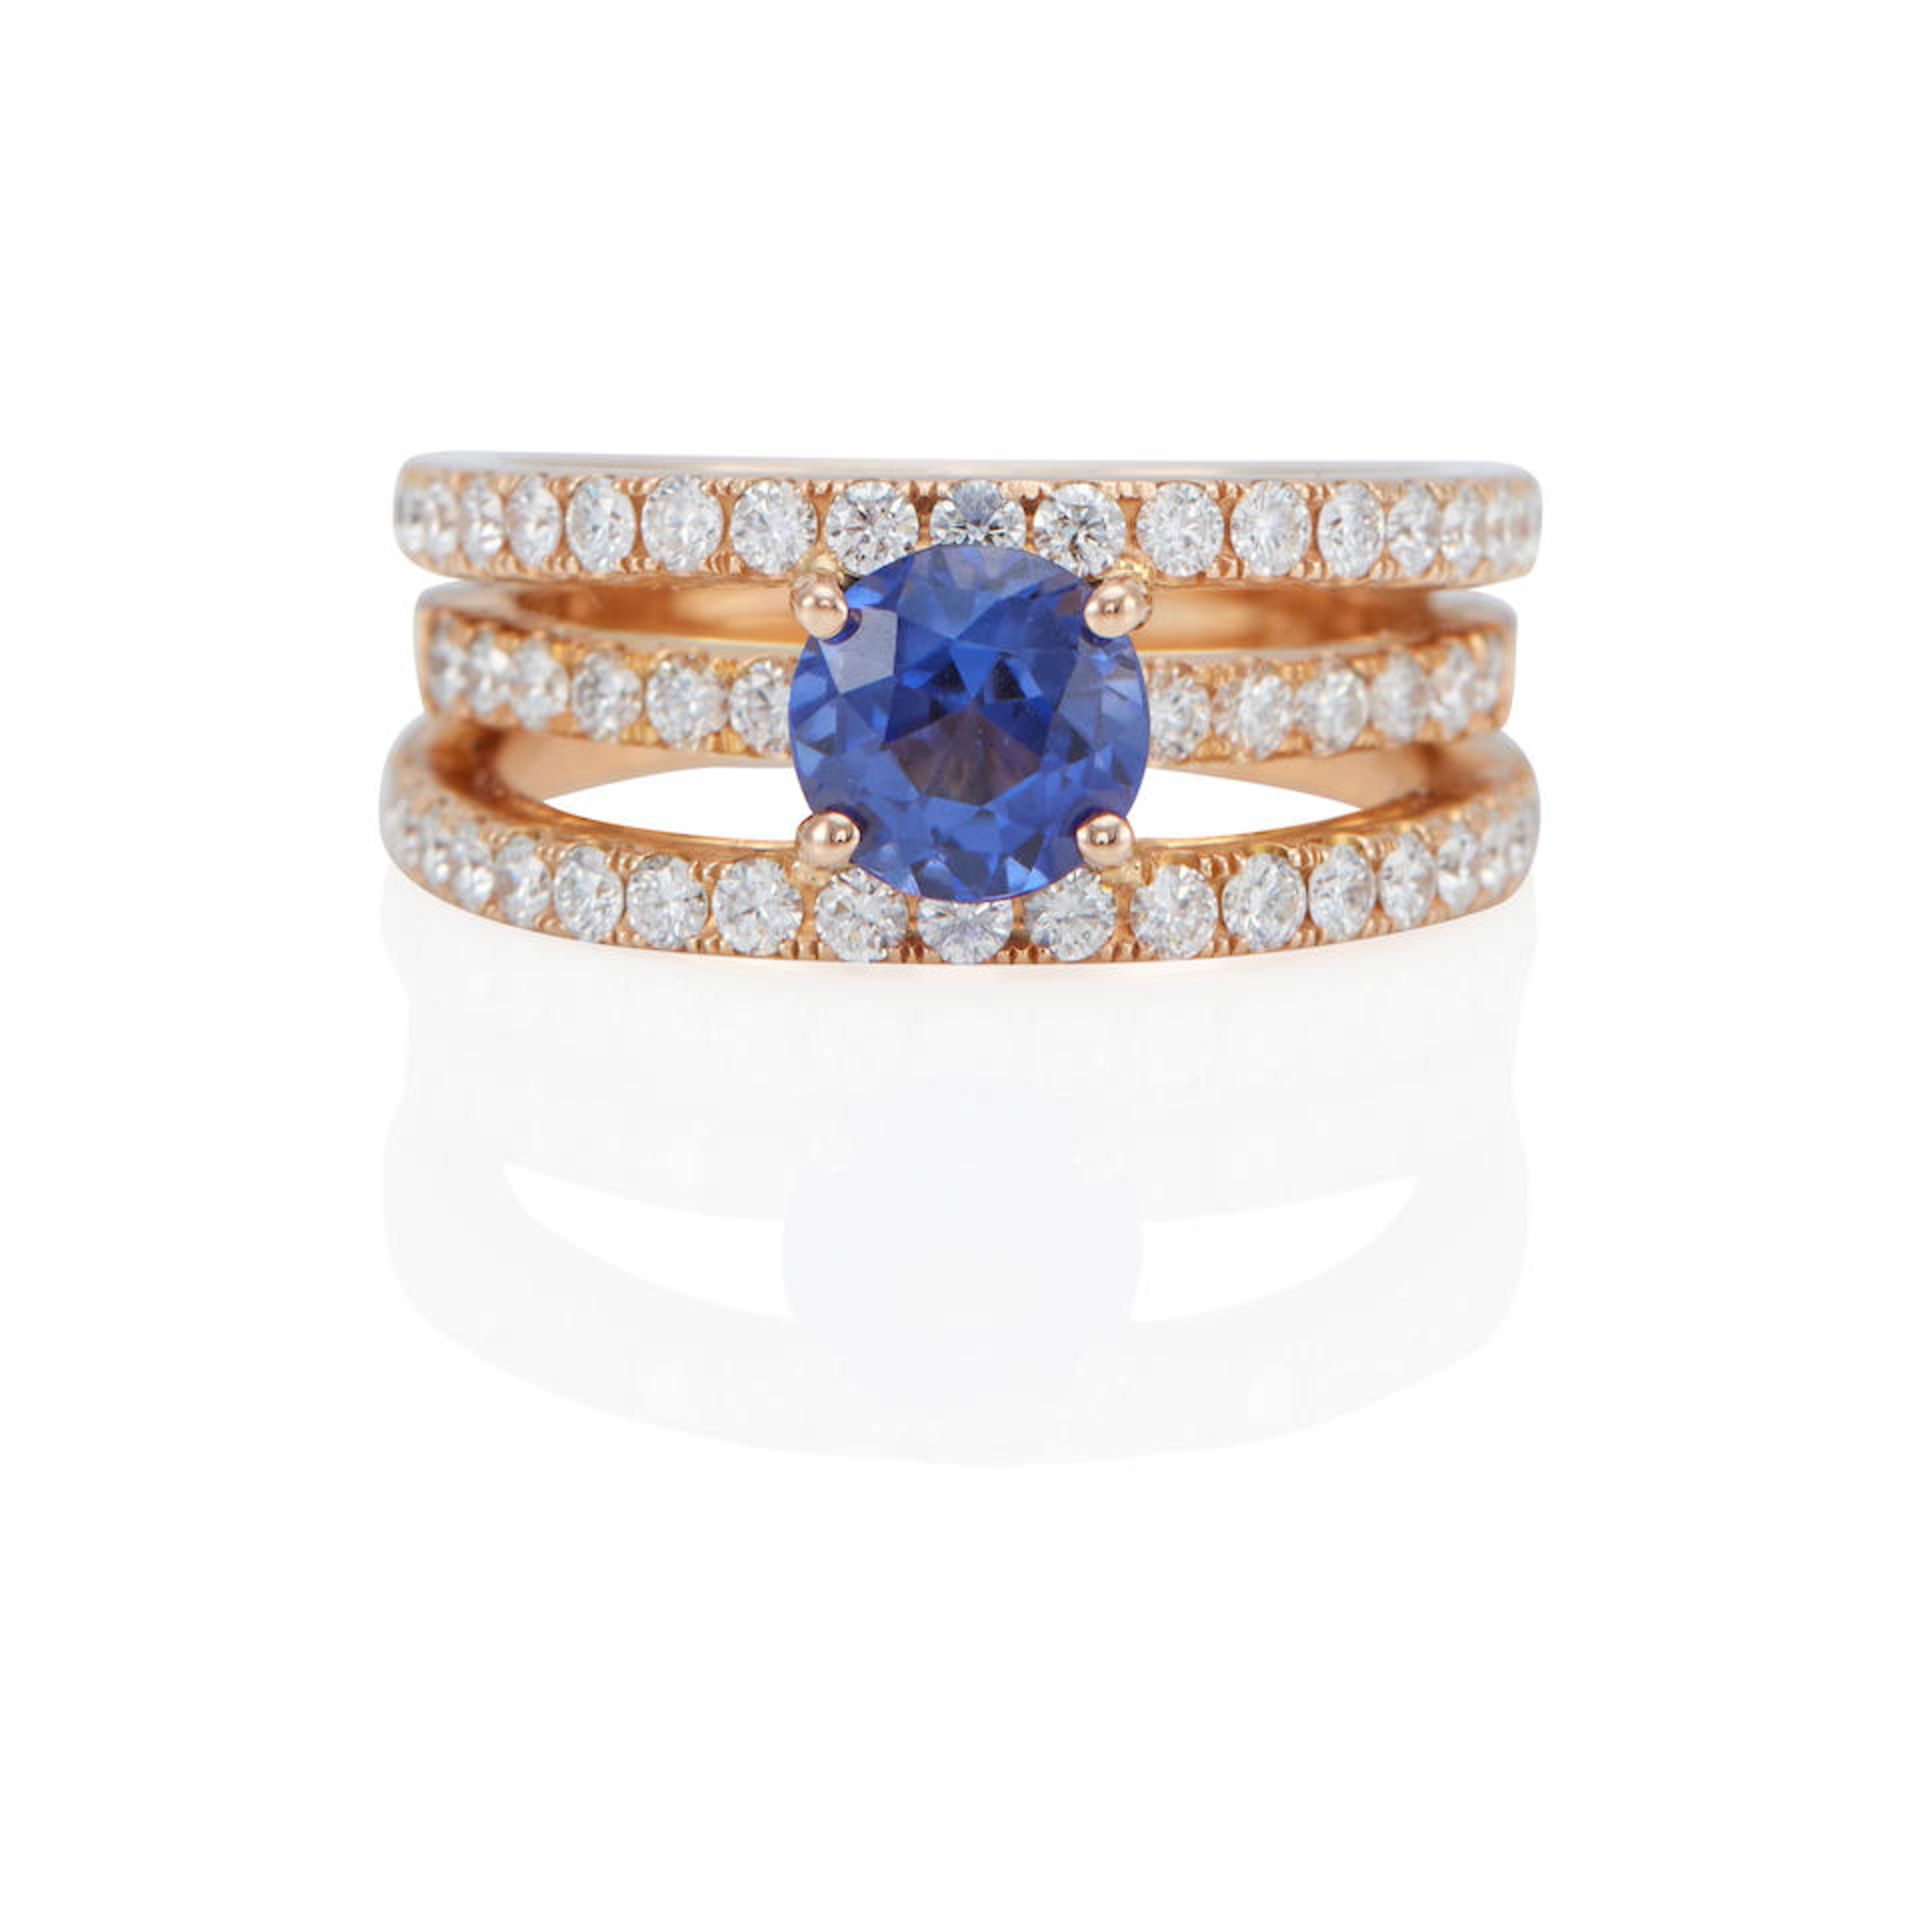 AN 18K ROSE GOLD, SAPPHIRE, AND DIAMOND RING